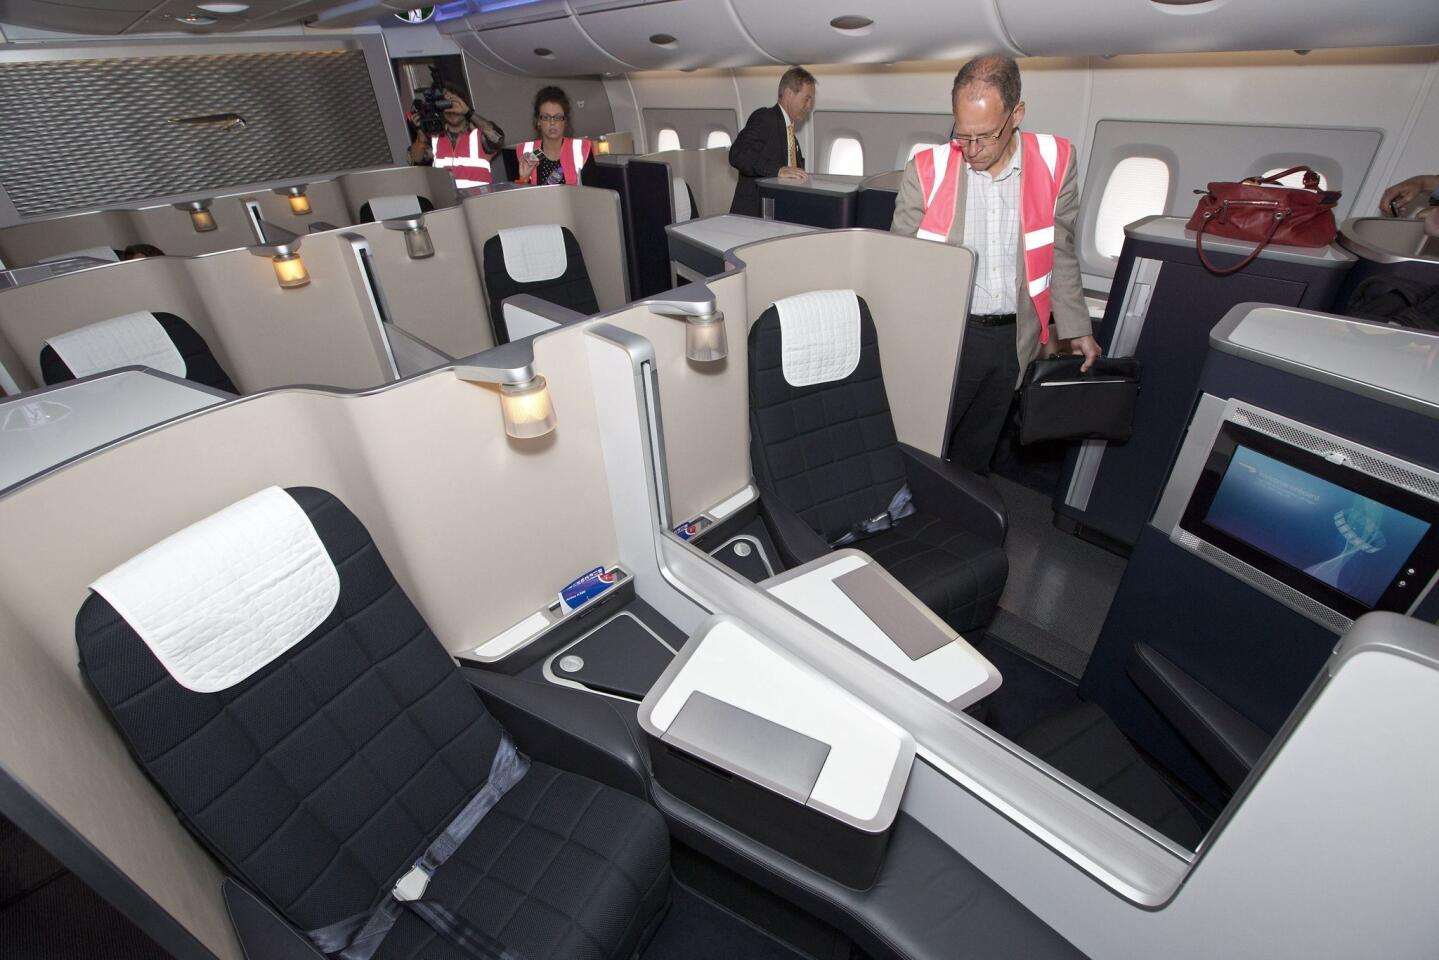 British Airways' 14 first class seats are found in the main cabin. The airline says that passengers in this class have 30% more personal space and 60% more storage space.